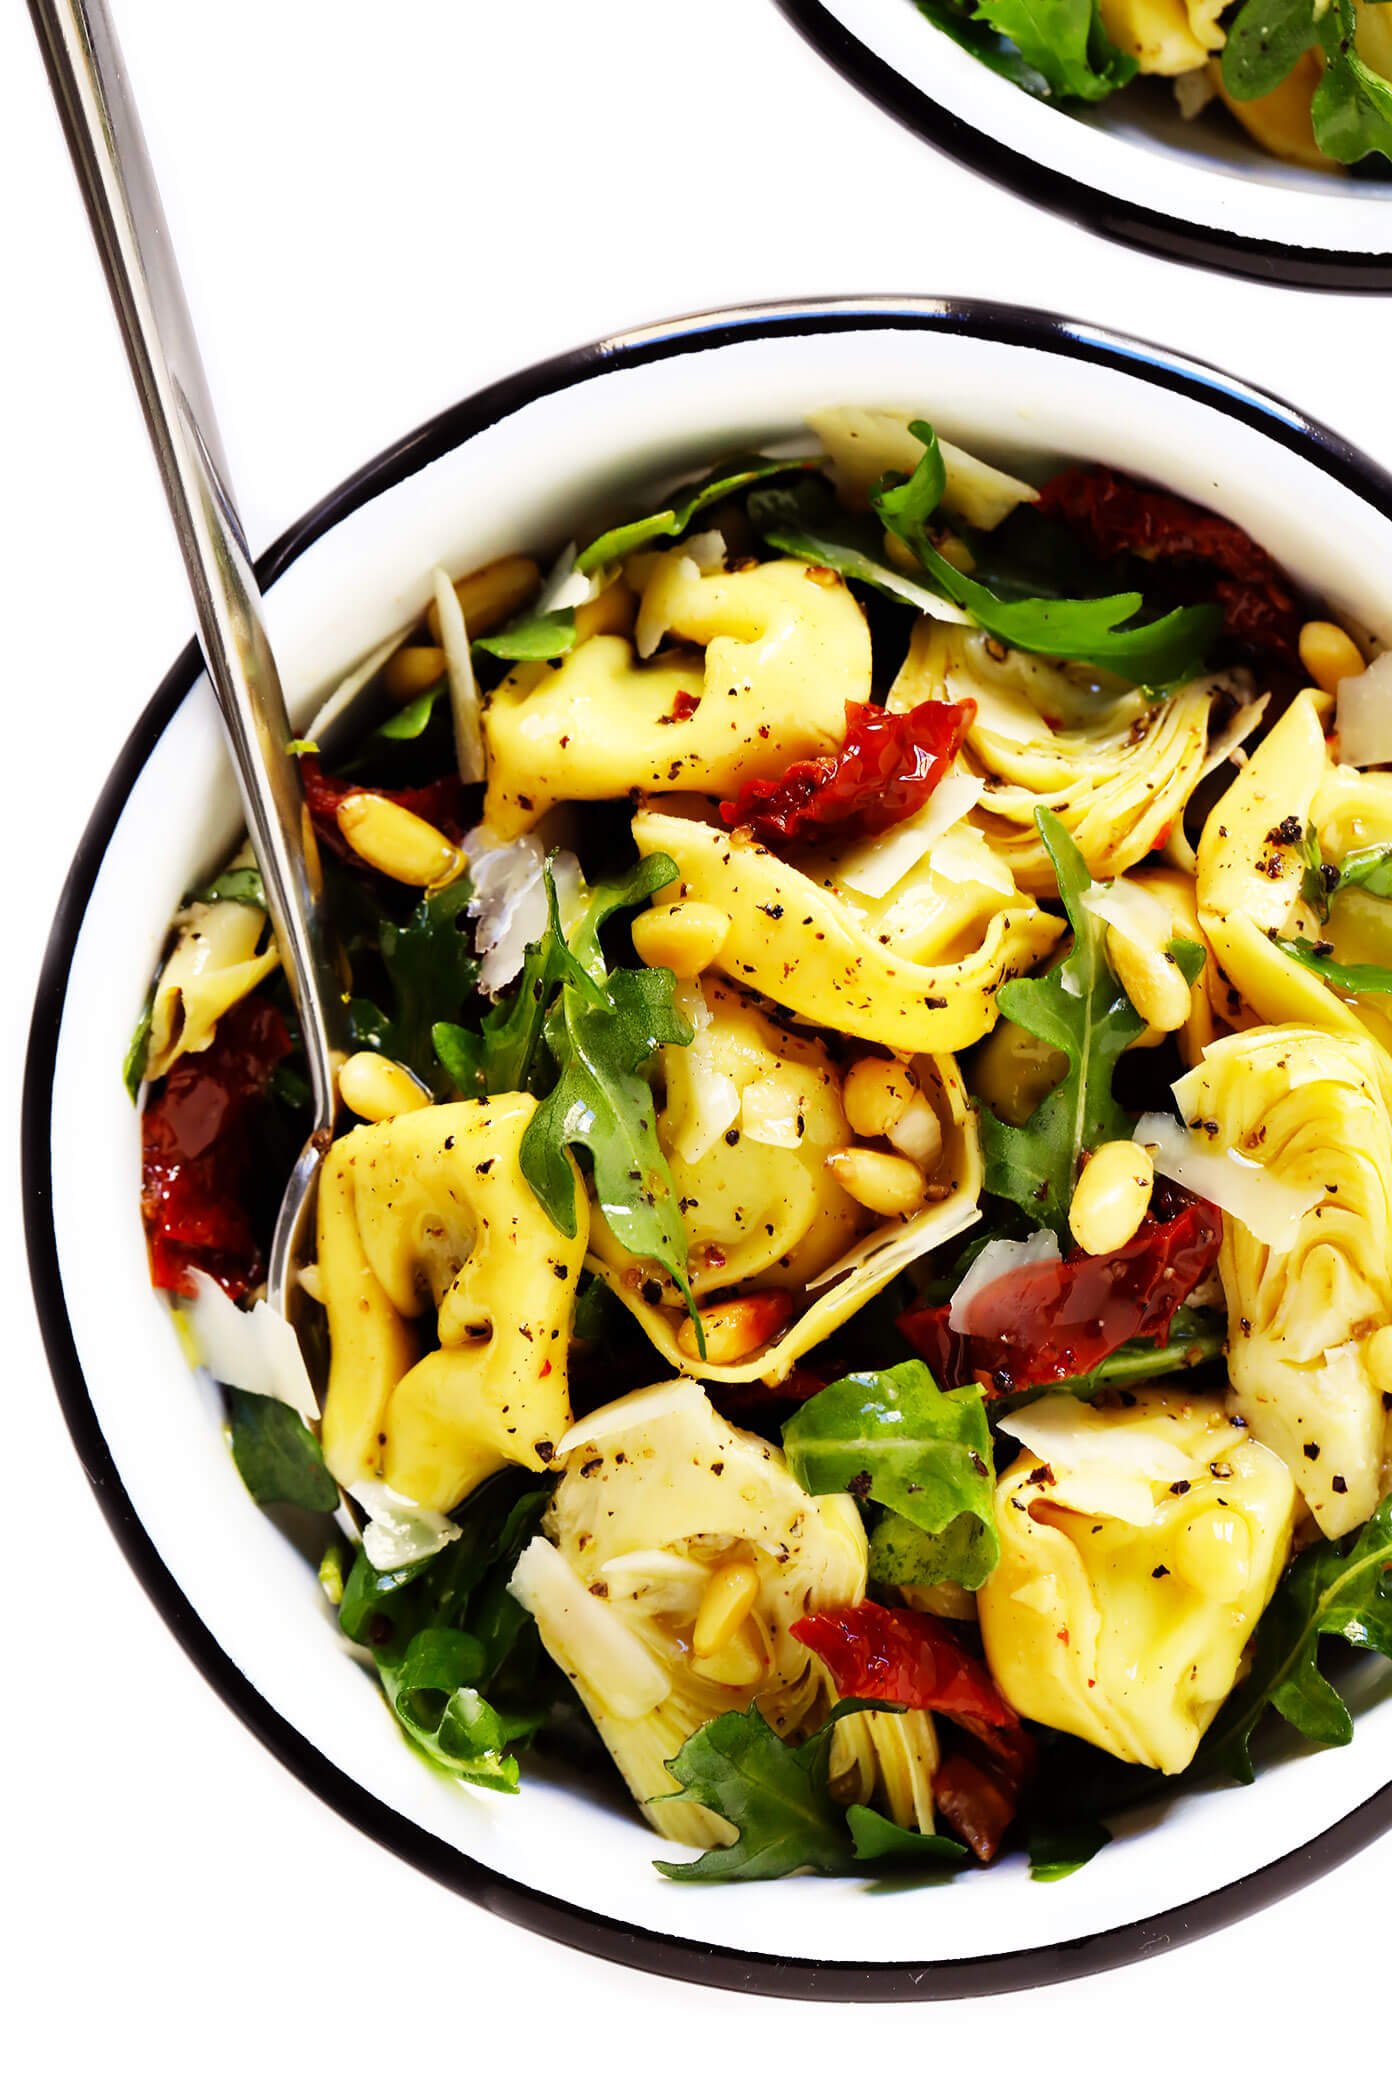 Tortellini Salad with Sun-Dried Tomatoes and Artichokes